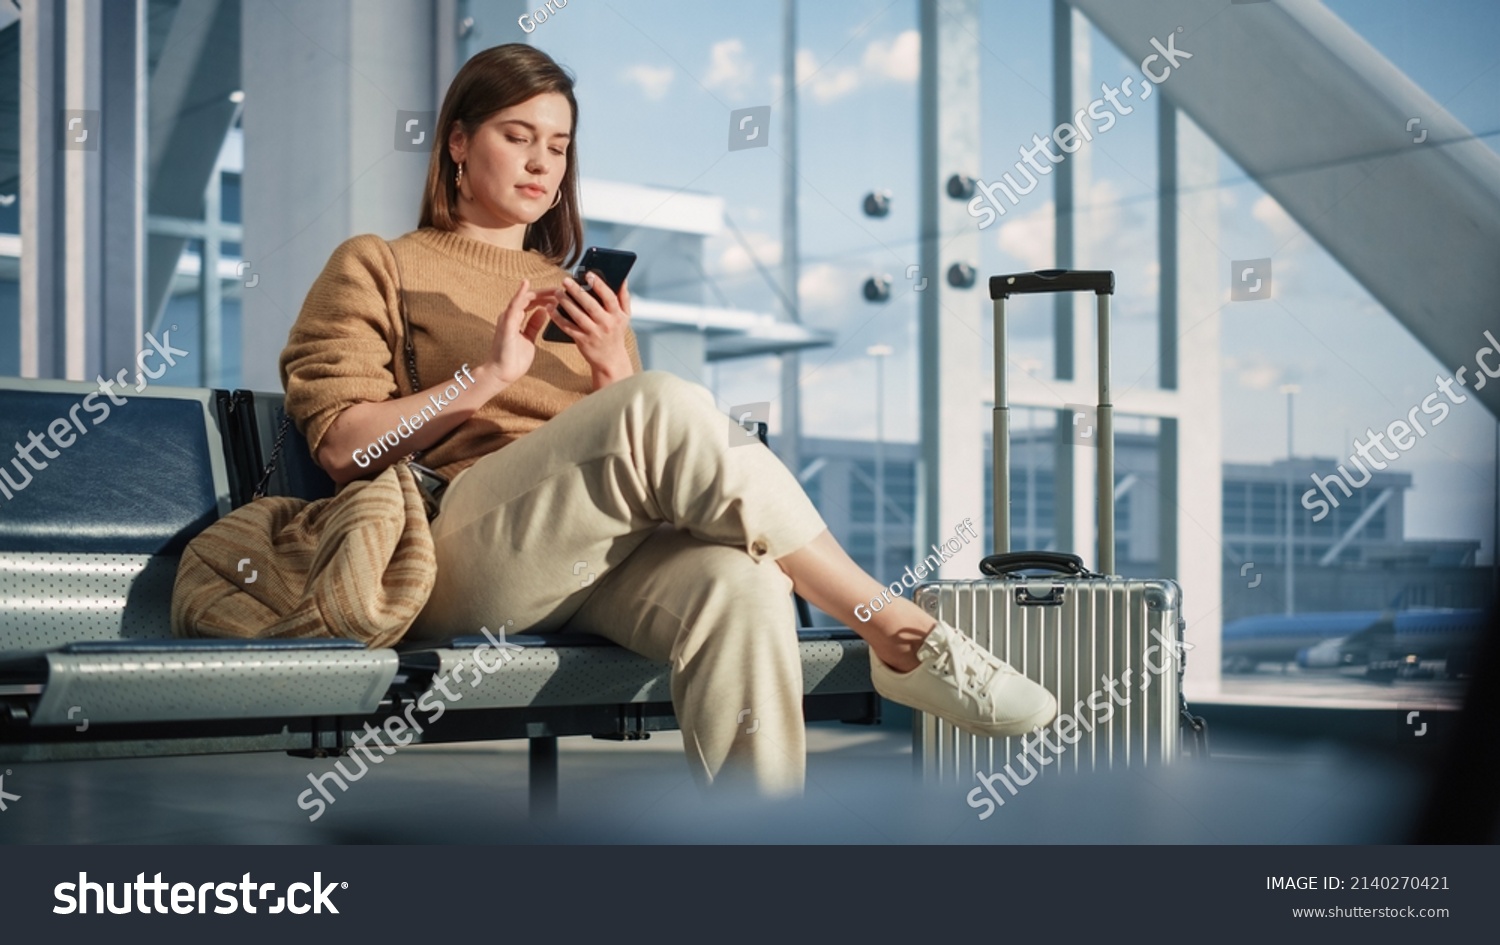 Airport Terminal: Woman Waits for Flight, Uses Smartphone, Browse Internet, Social Media, Online Shopping. Traveling Female Remote Work Online on Mobile Phone in a Boarding Lounge of Airline Hub #2140270421